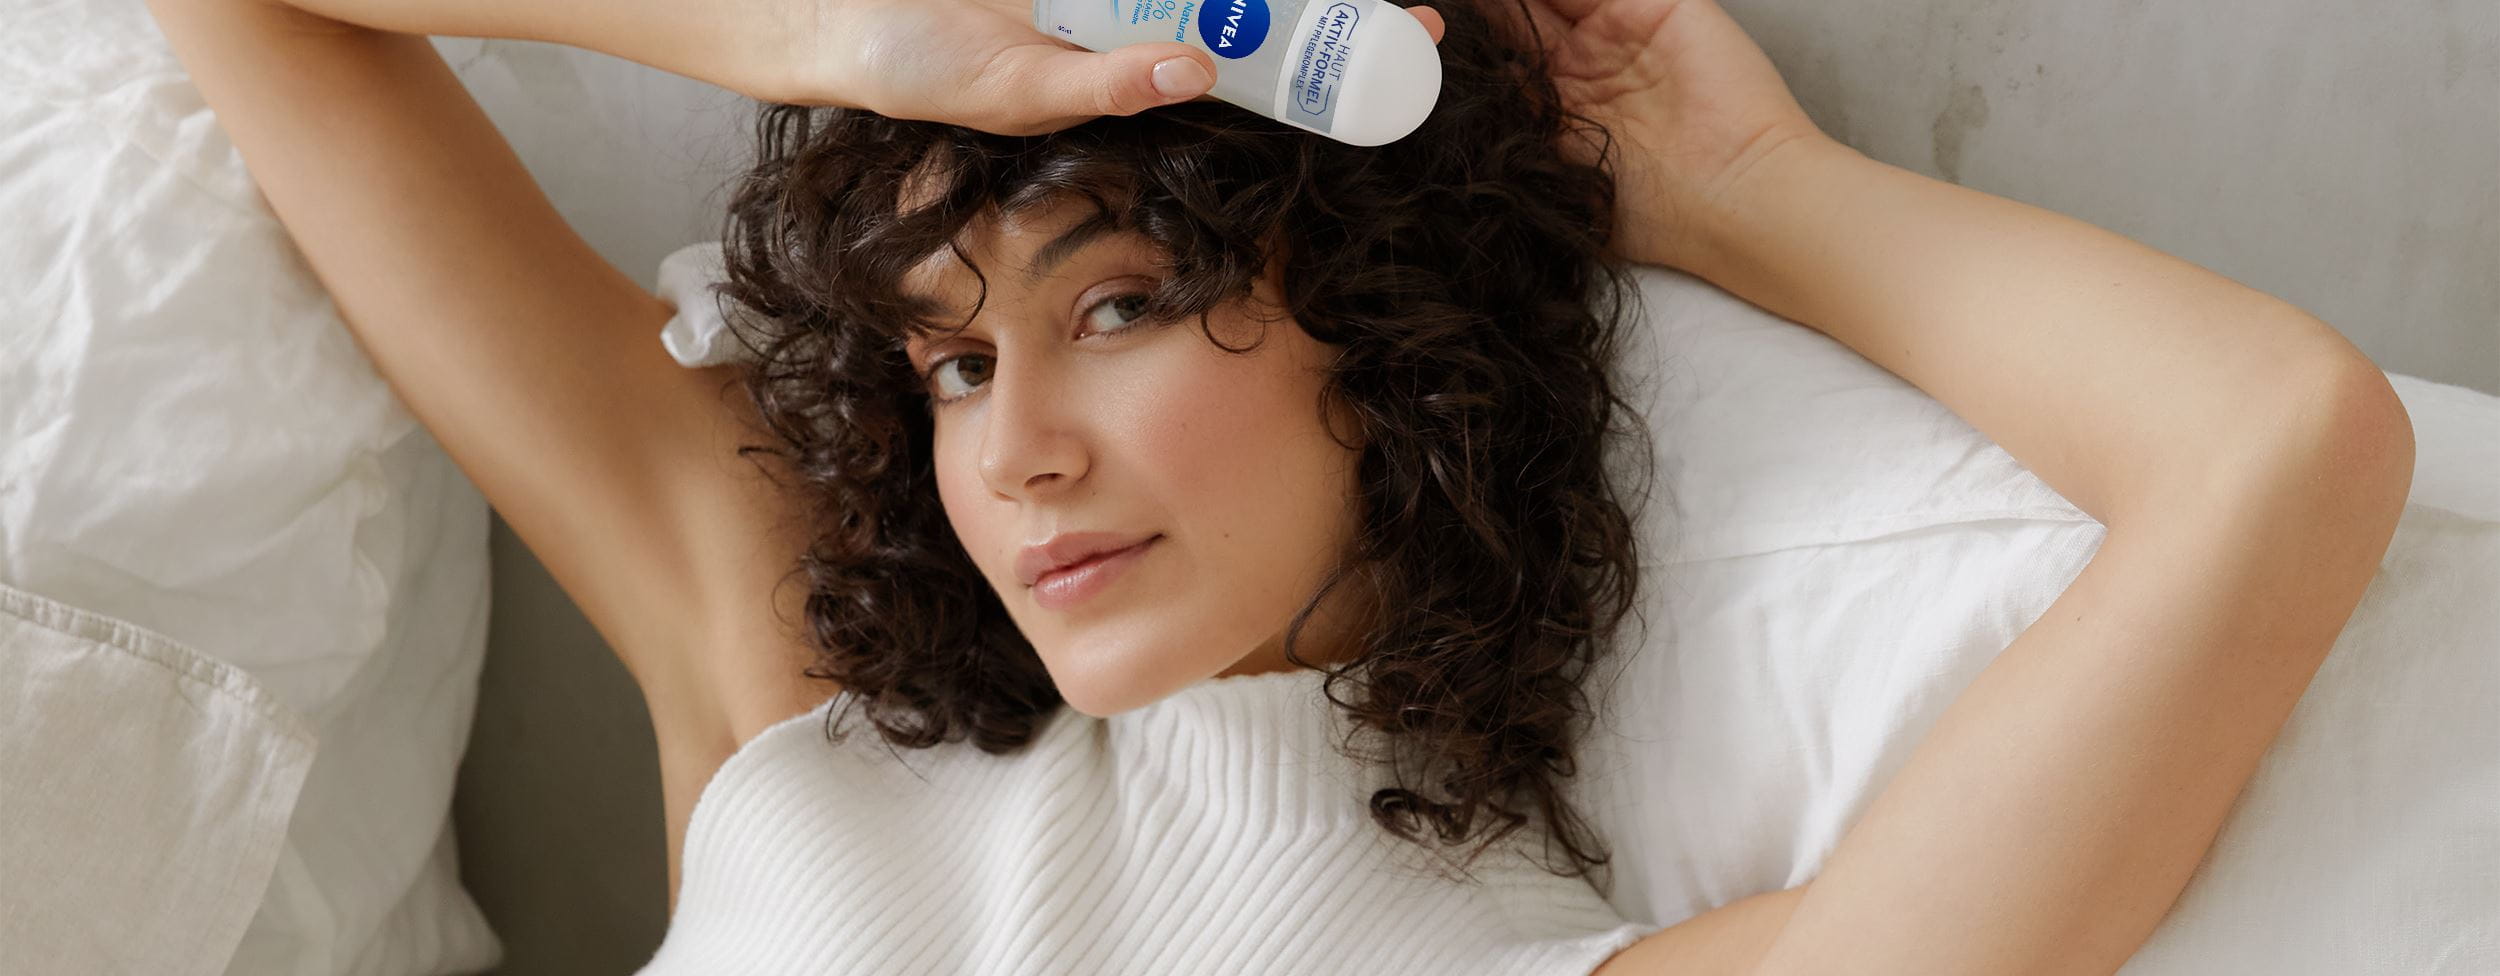 woman holding a Nivea roll-on